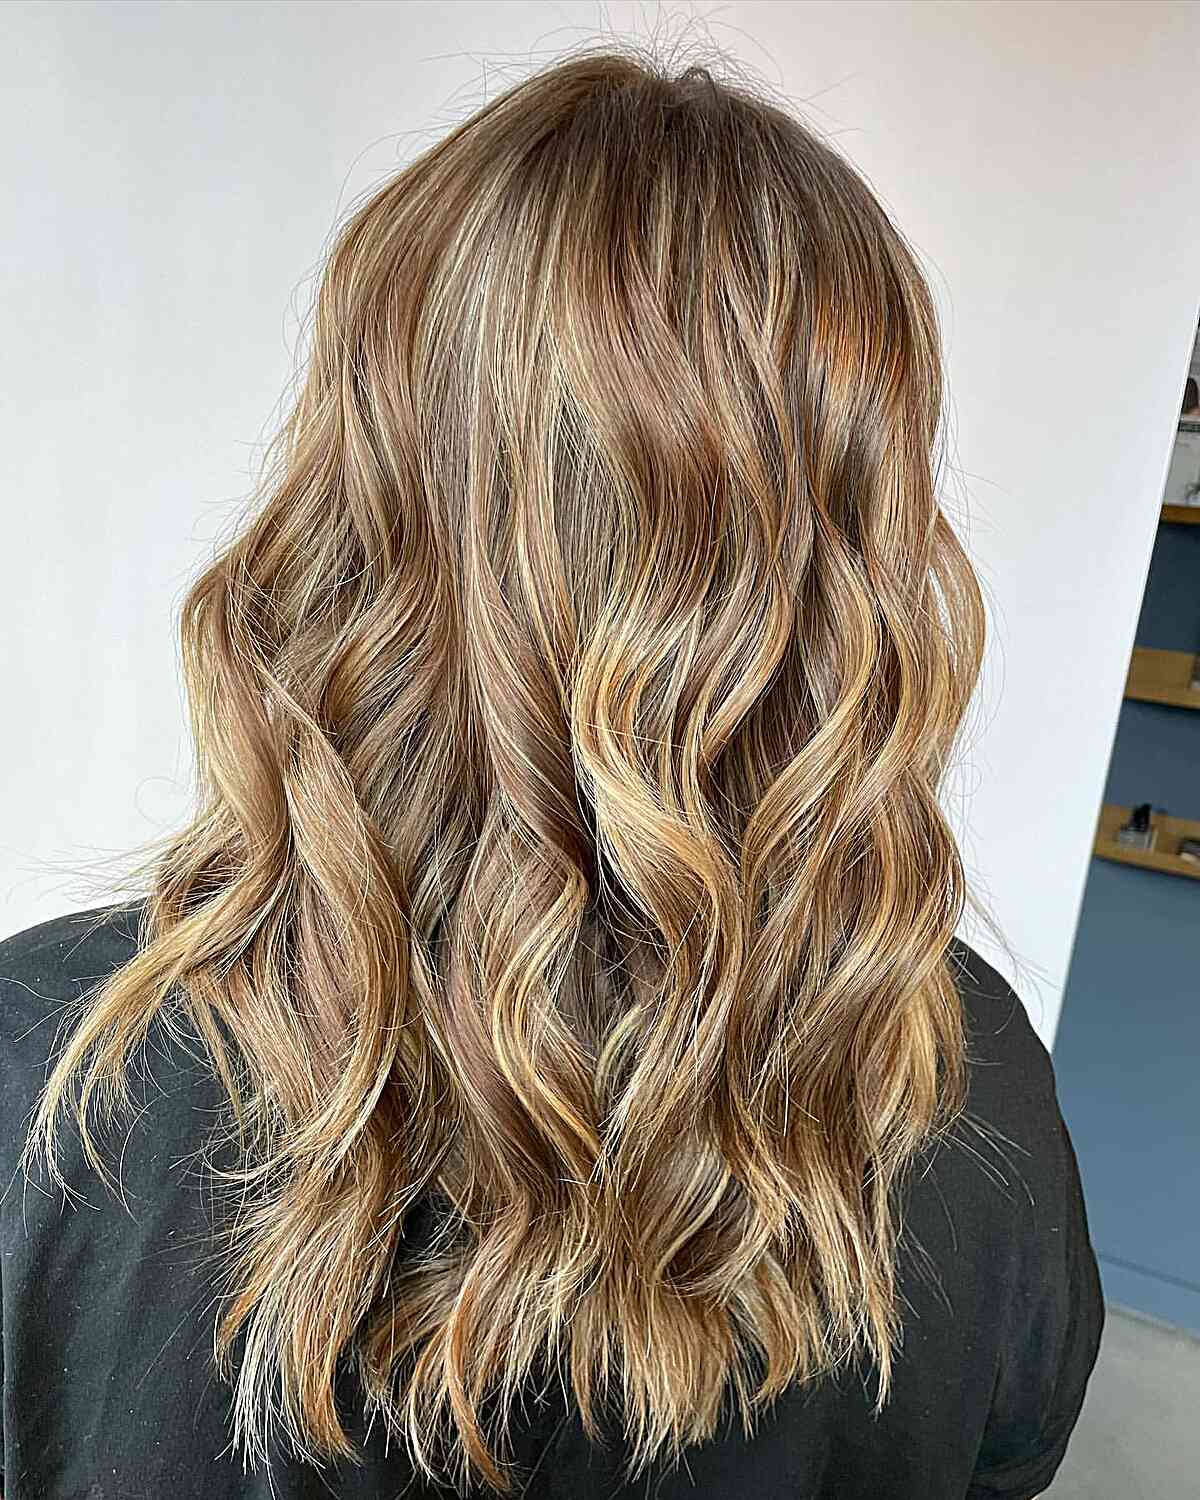 Golden Dirty Bronde Balayage Foilayage with Hints of Copper for Choppy Medium Hair